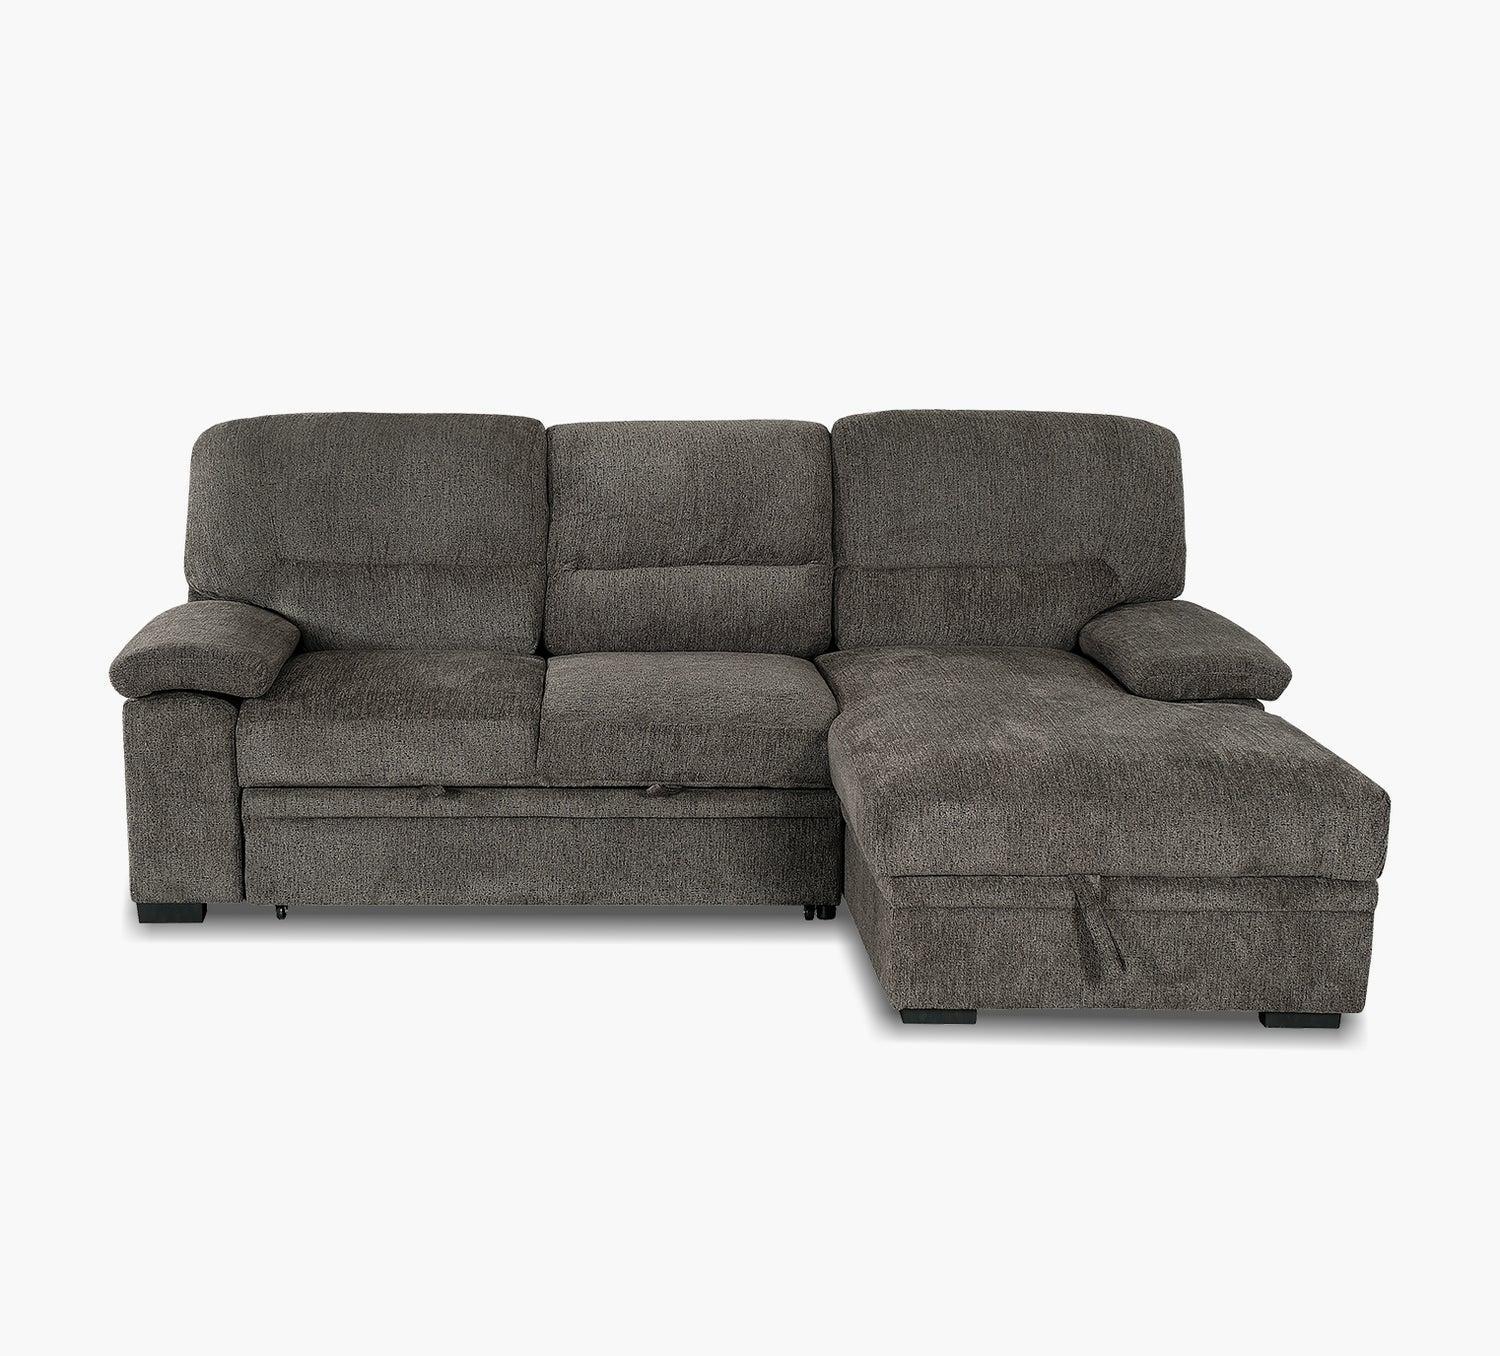 Media Sofa with Pull Out Pop Up Ottoman and Storage Chaise in Gray